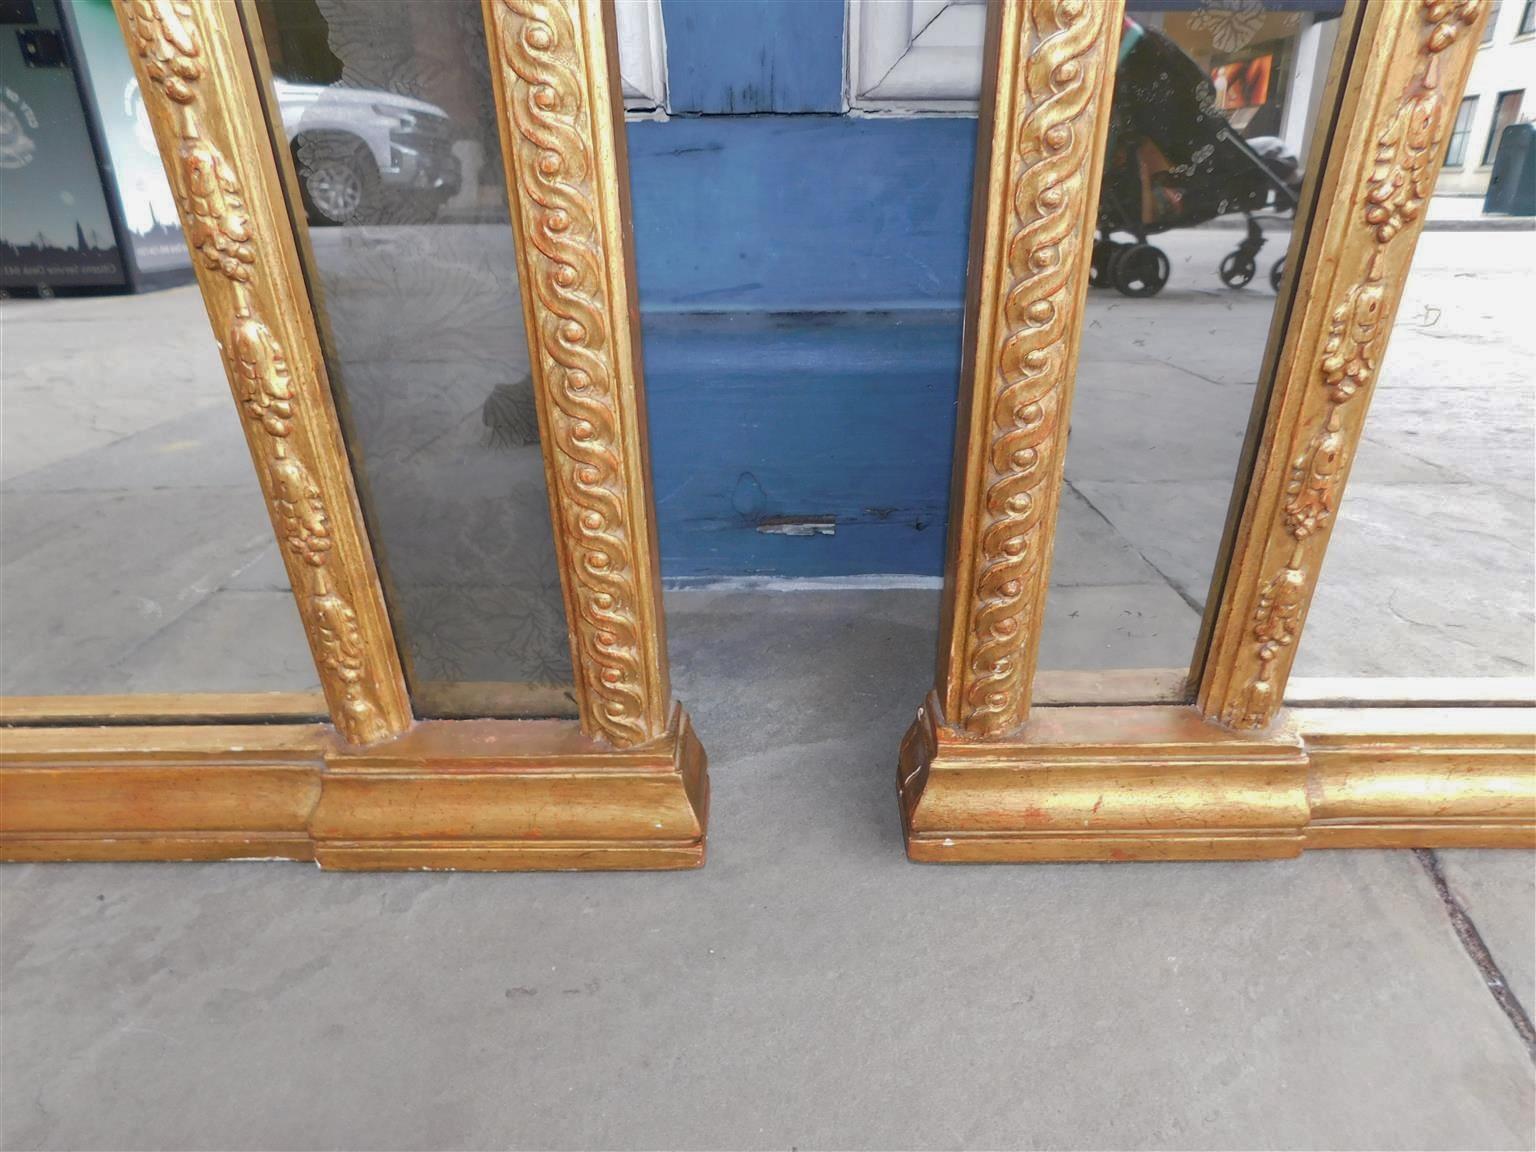 Pair of English Regency Gilt Wood and Gesso Foliage Wall Mirrors, Circa 1815 For Sale 11